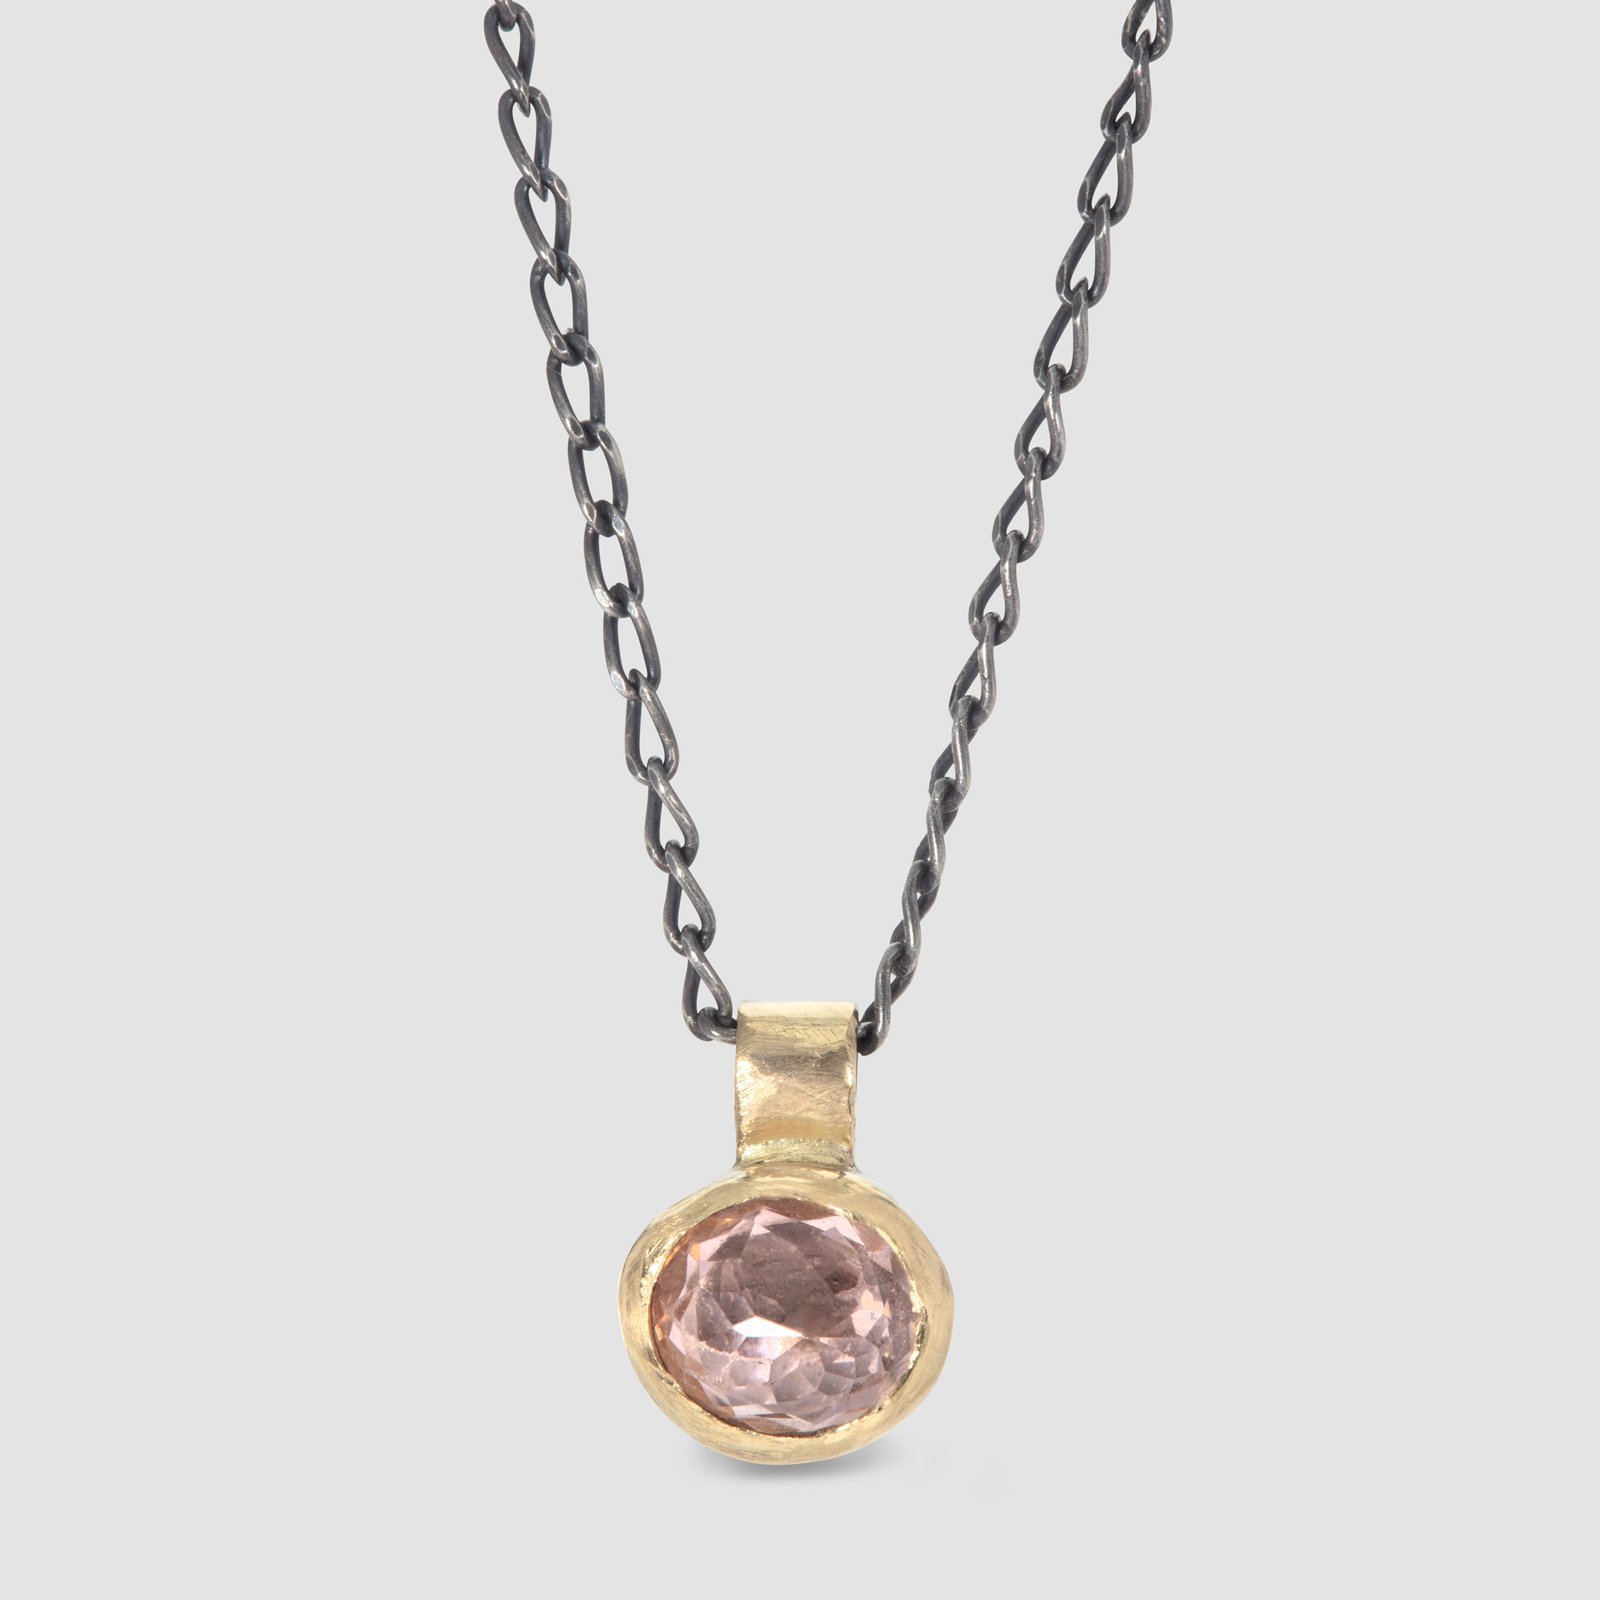 Buy Eternity Tourmaline Necklace in Sterling Silver, Pink Tourmaline  Necklace, Infinity Tourmaline Necklace Online in India - Etsy